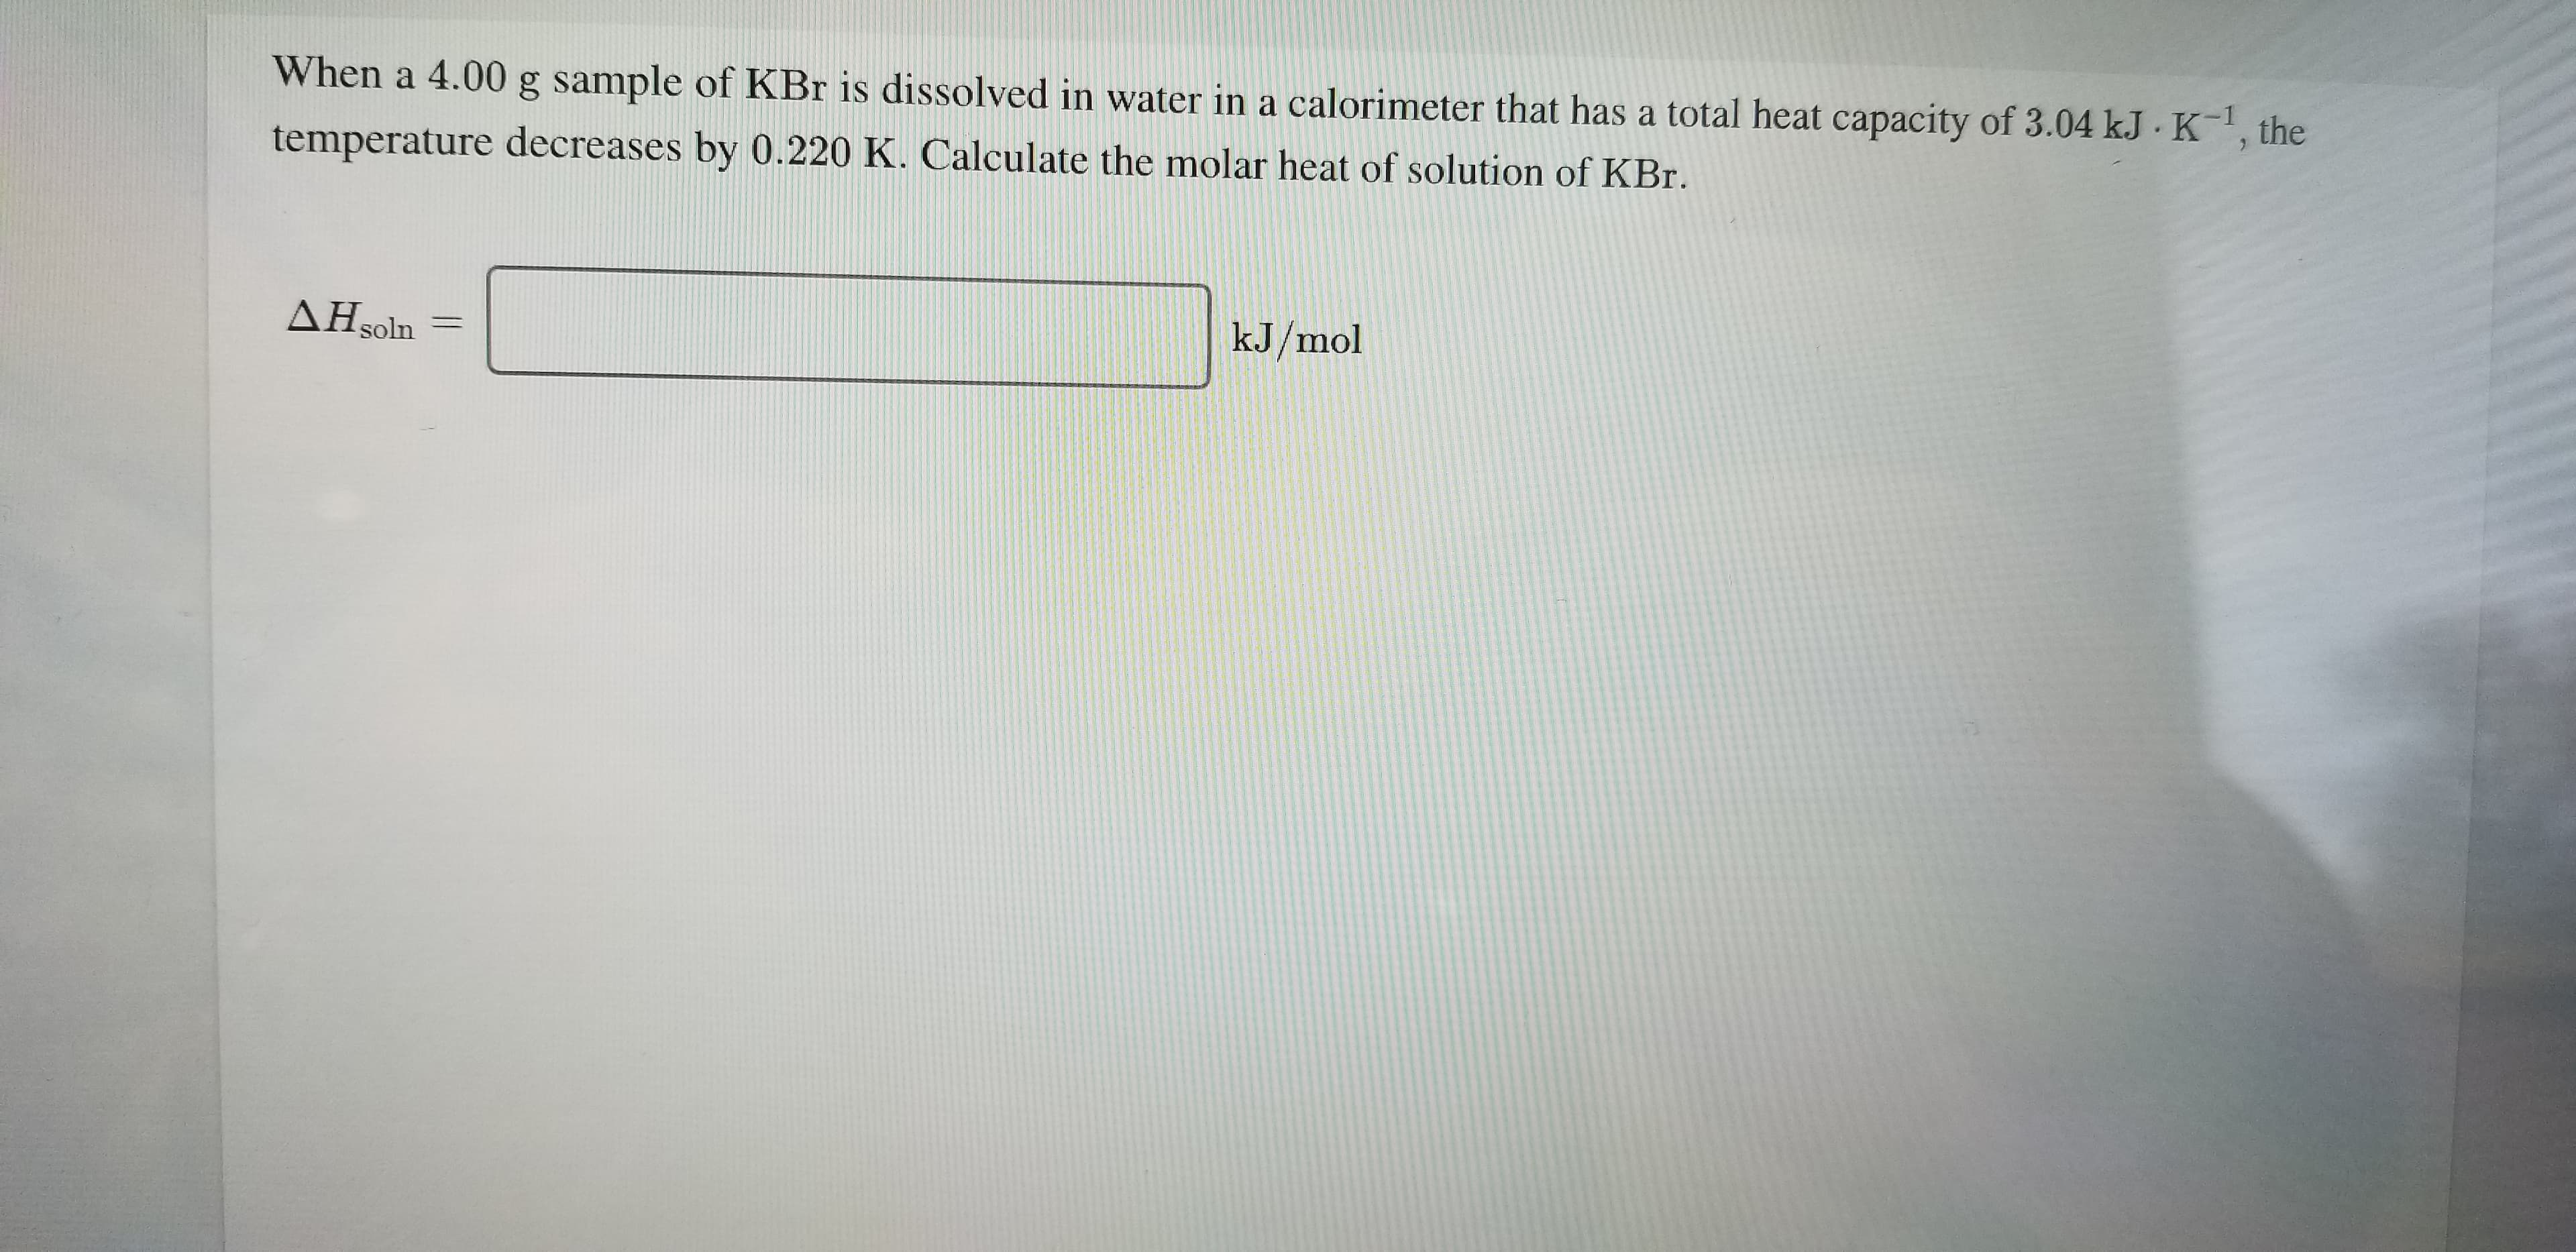 When a 4.00 g sample of KBr is dissolved in water in a calorimeter that has a total heat capacity of 3.04 kJ K, the
temperature decreases by 0.220 K. Calculate the molar heat of solution of KBr.
kJ/mol
AH soln
